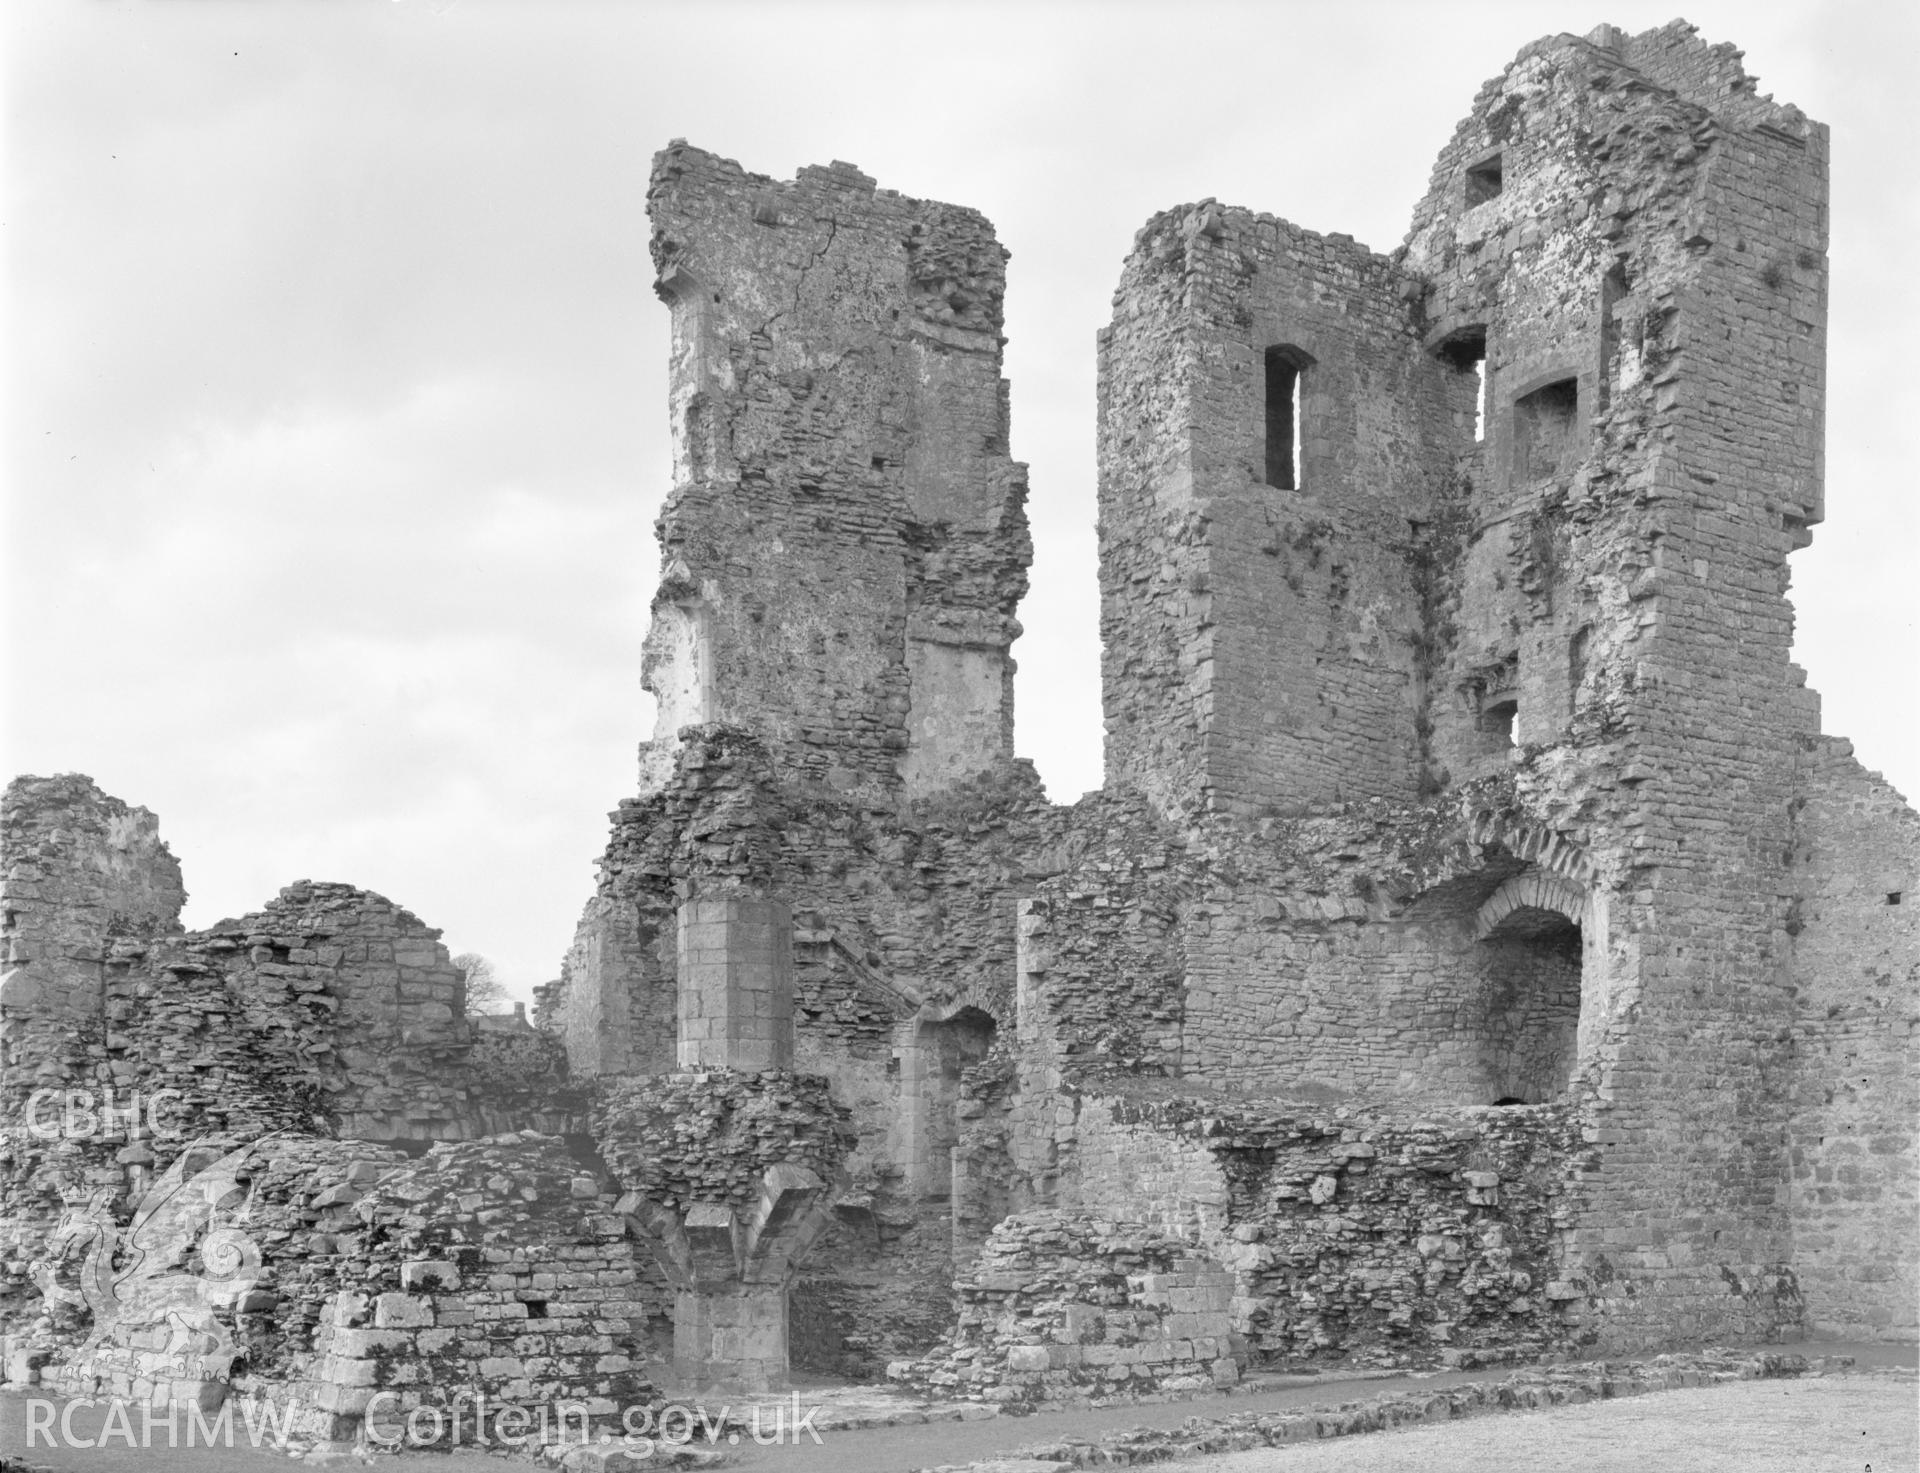 General  view of the interior ruins of Coity Castle, Coity Higher taken 09.04.65.